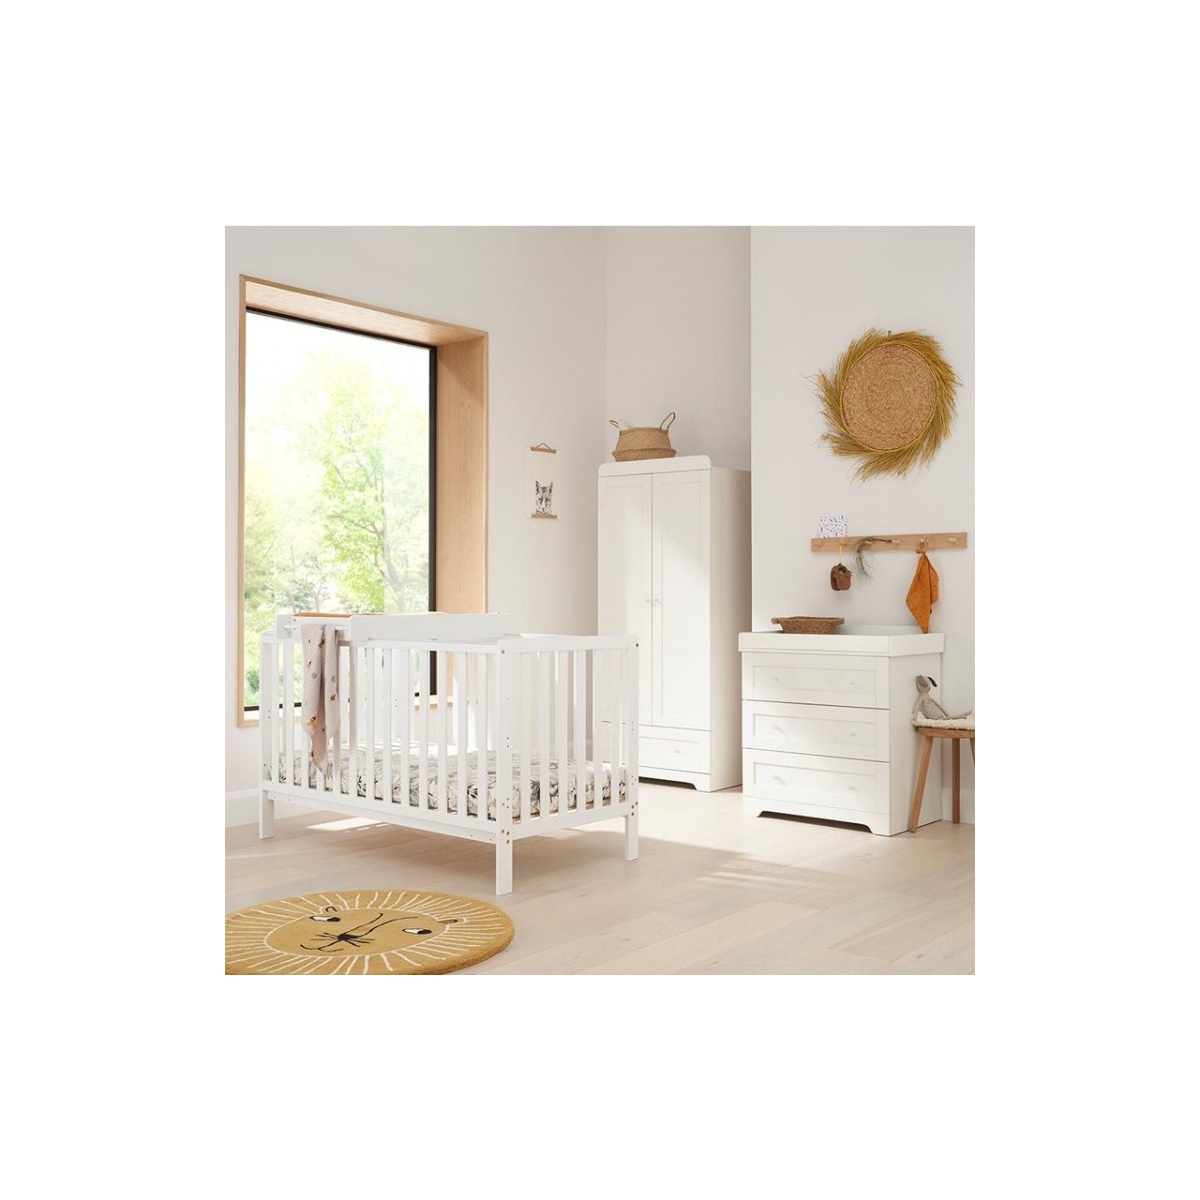 Tutti Bambini Malmo 3 Piece Room Set with Cot Top Changer-White